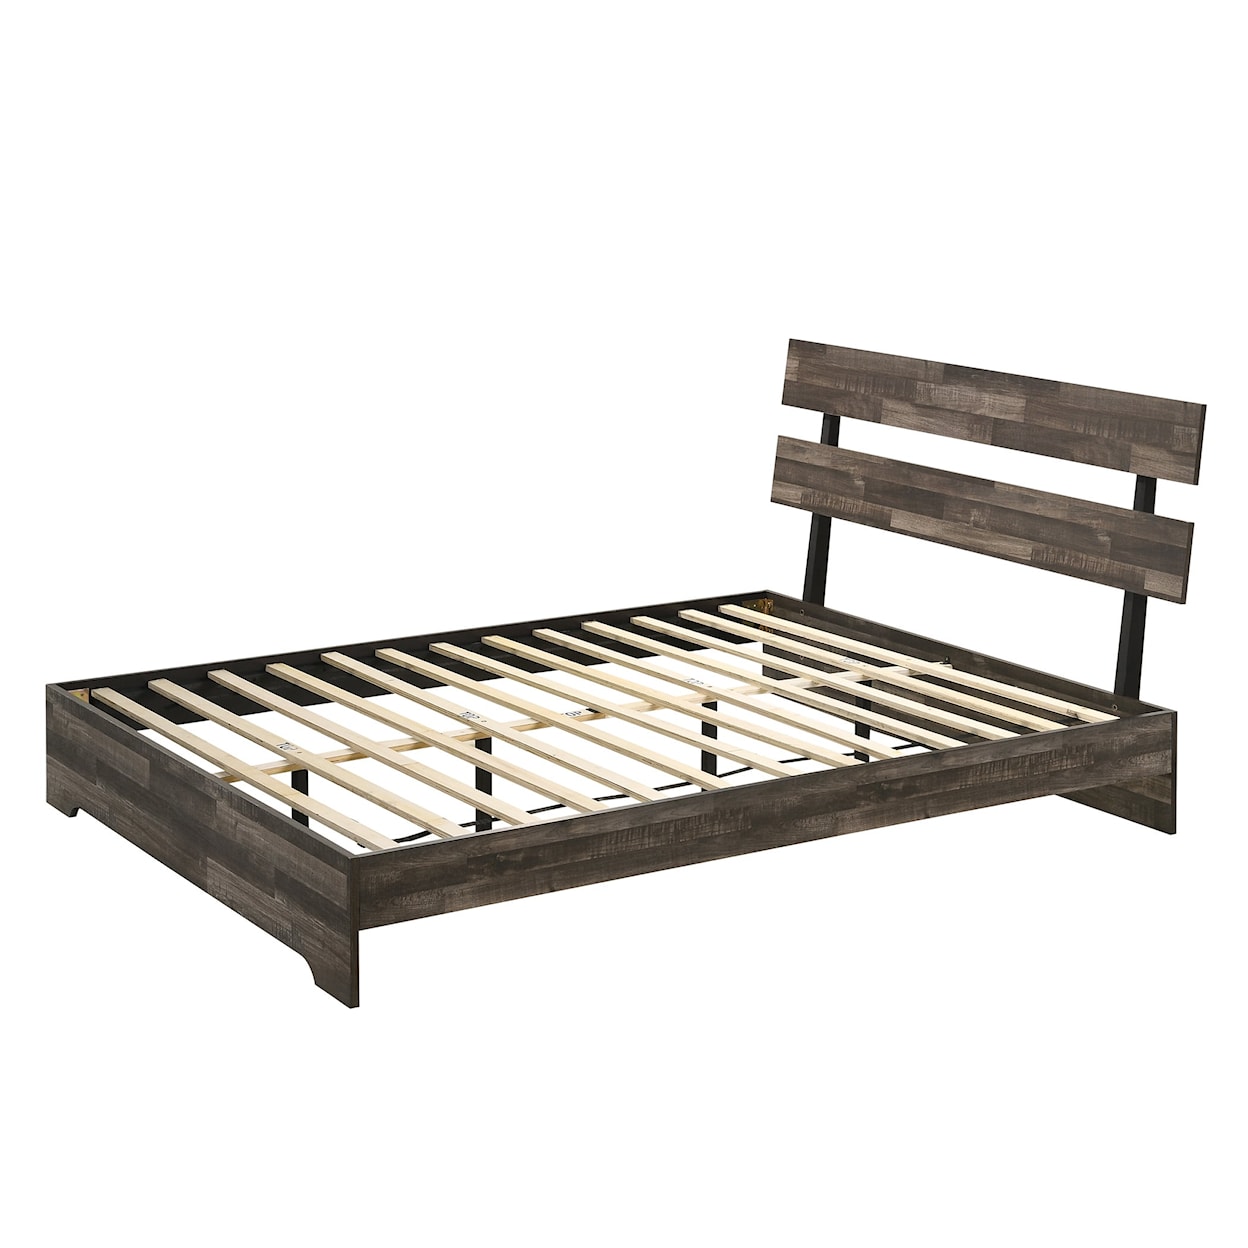 Crown Mark Atticus King Bed